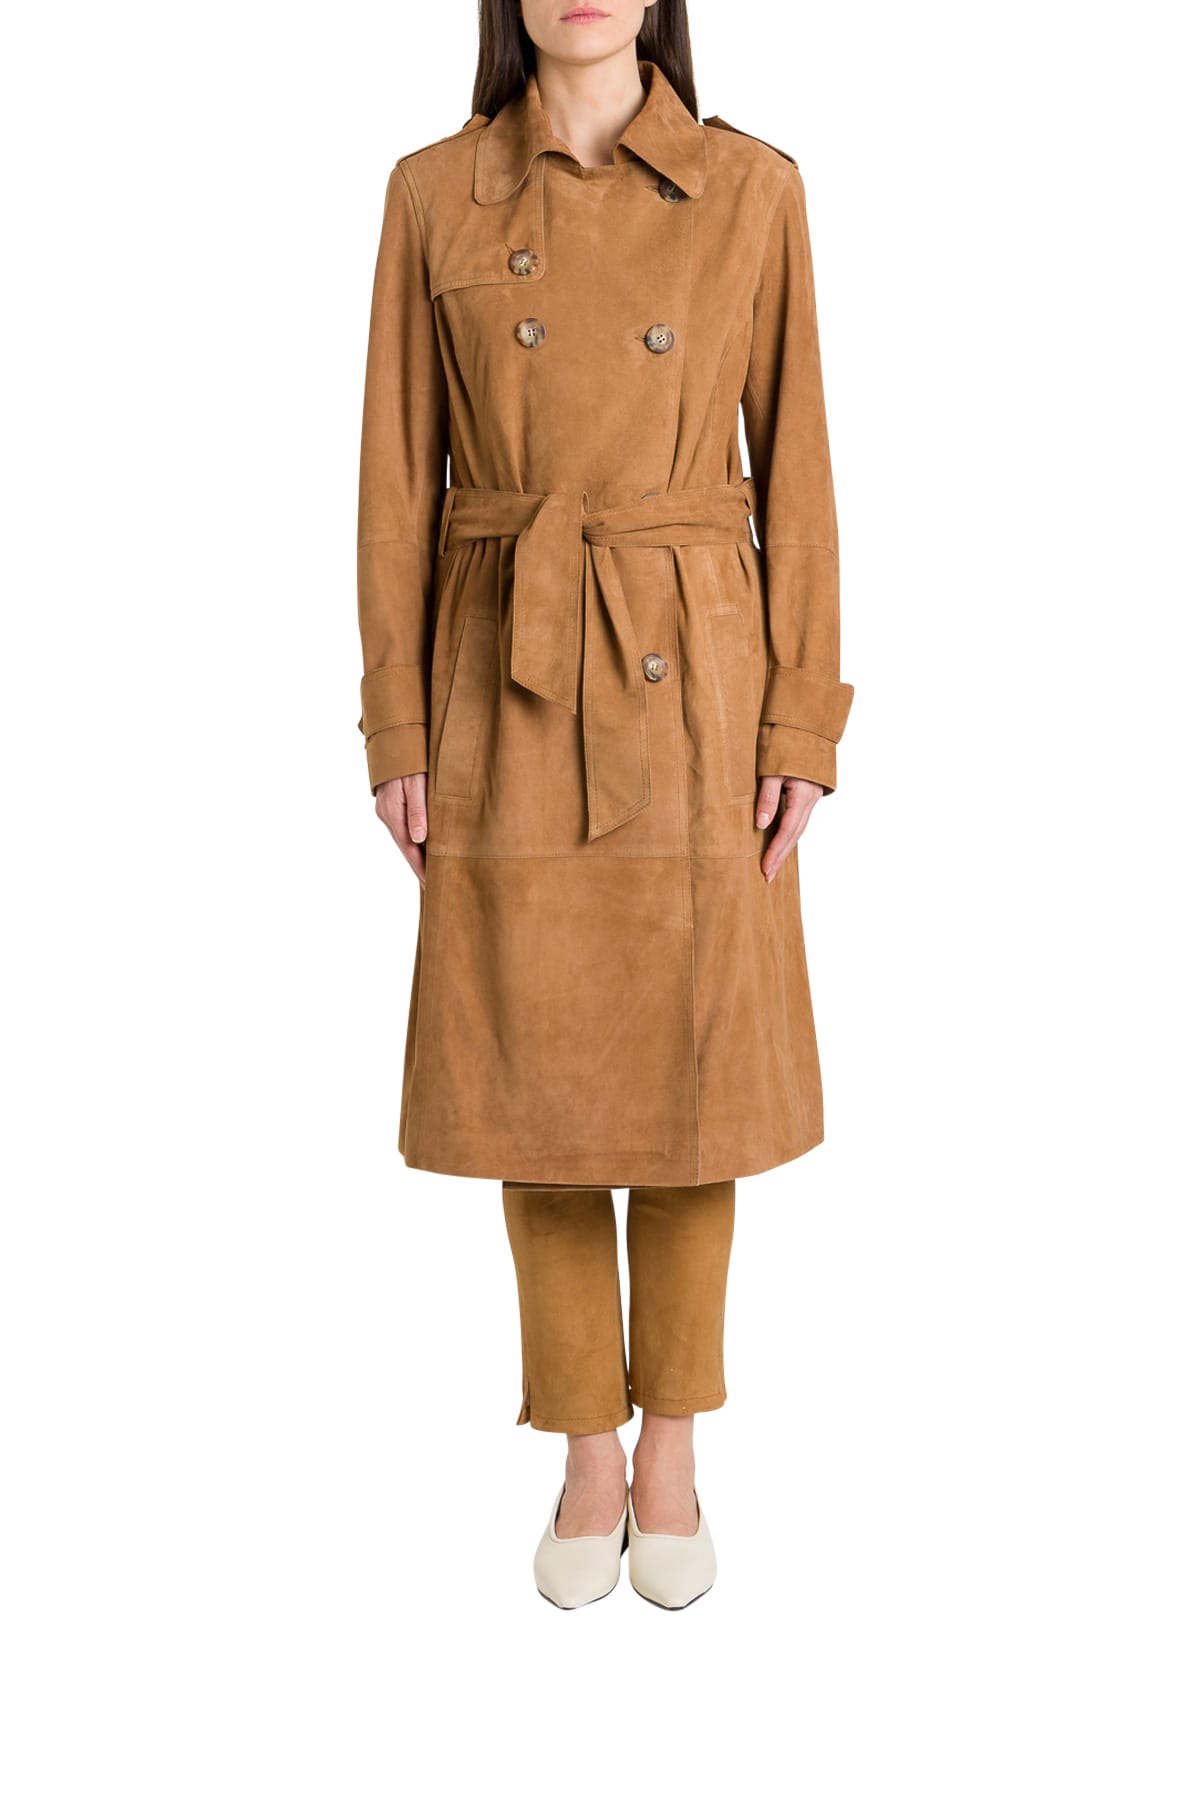 ARMA LORENZA SUEDE TRENCH COAT,11274300